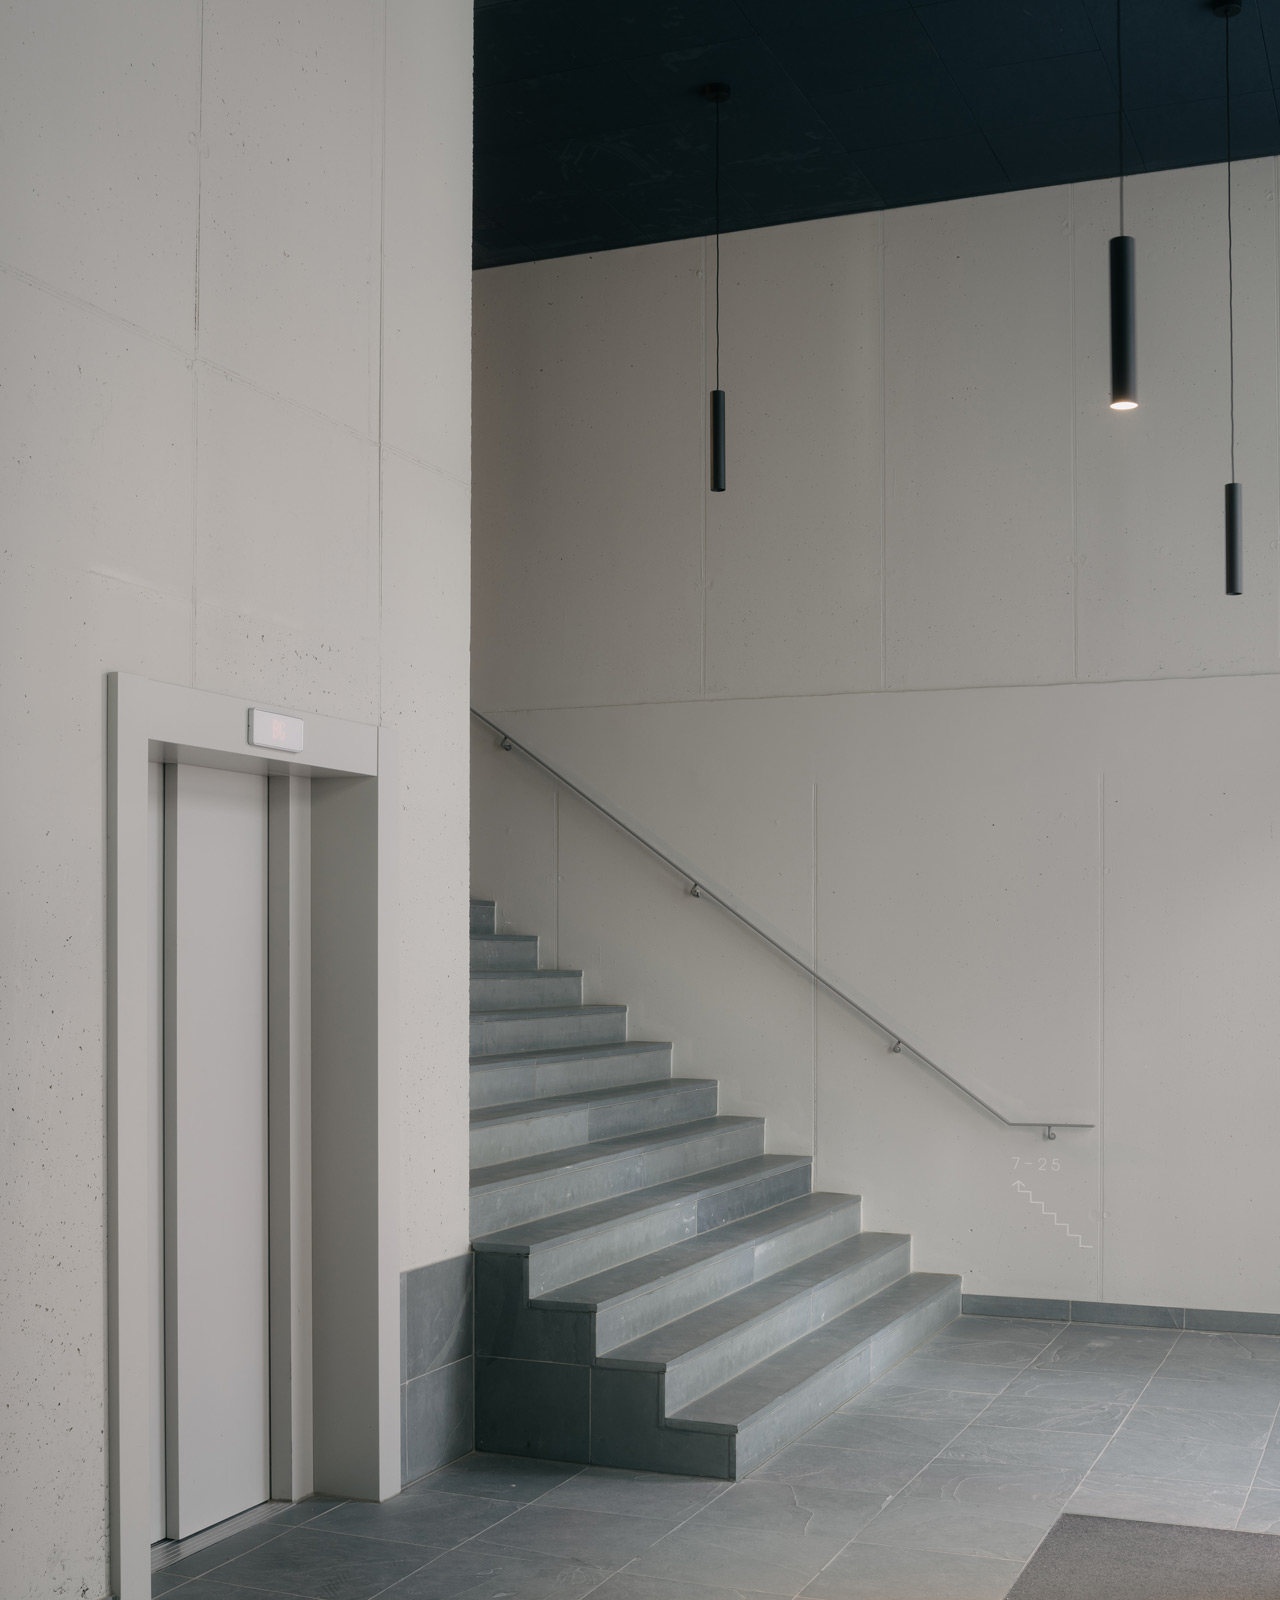 interior entrance photo with staircase and elevator in Oostenburg apartment block Draaier by BETA architect amsterdam evert klinkenberg gus auguste van oppen image by Stijn Bollaert